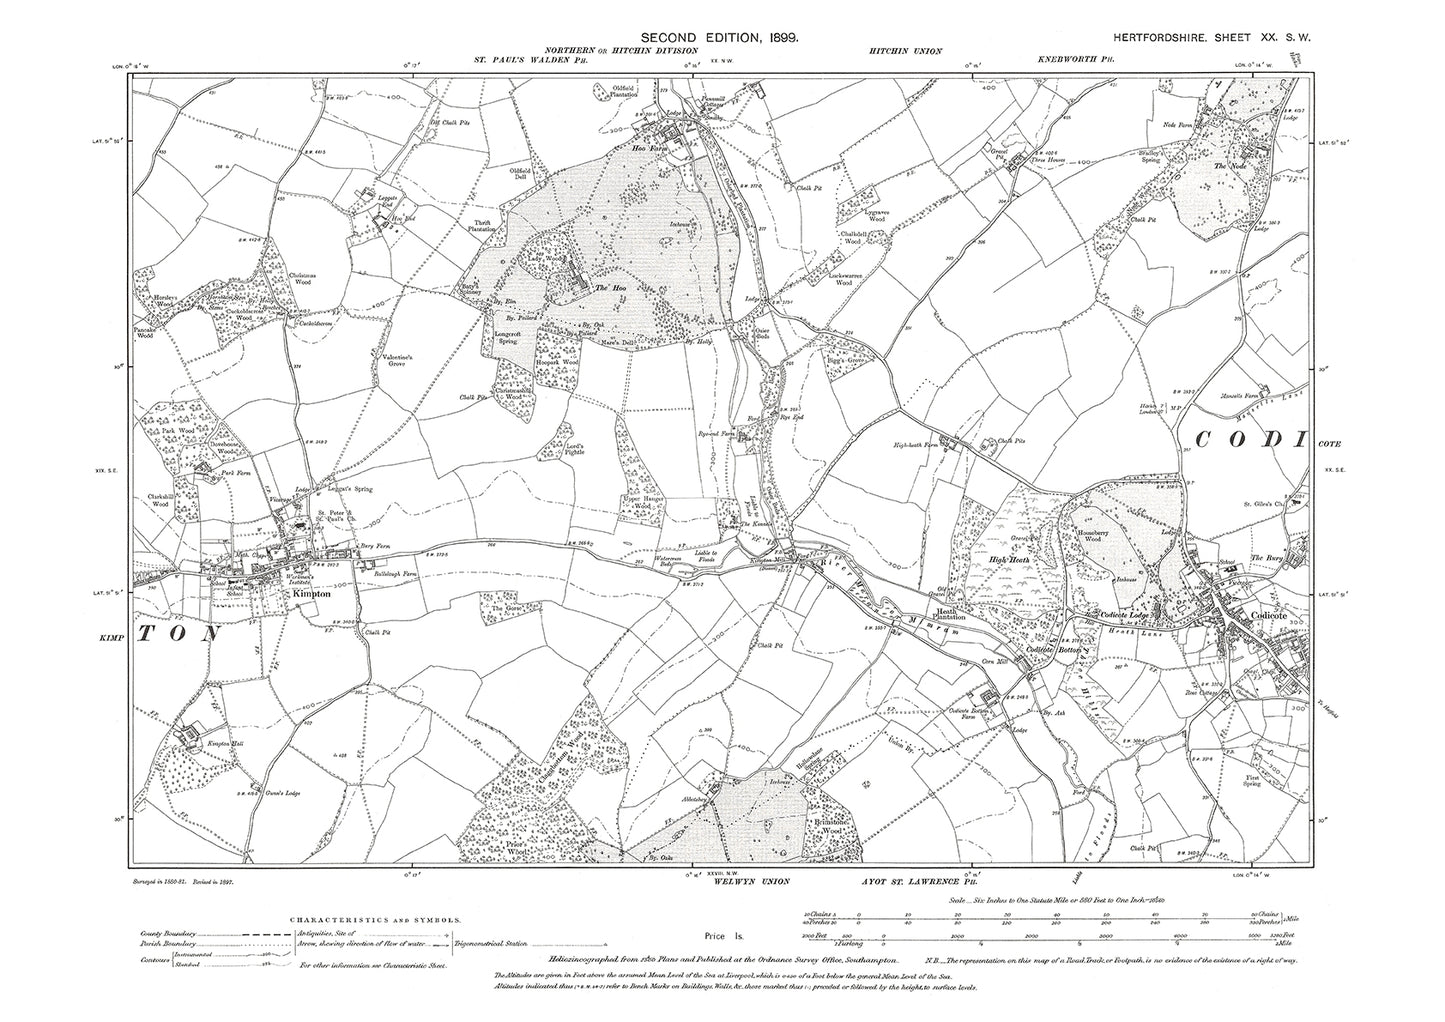 Old OS map dated 1899, showing Codicote, Kimpton in Hertfordshire - 20SW